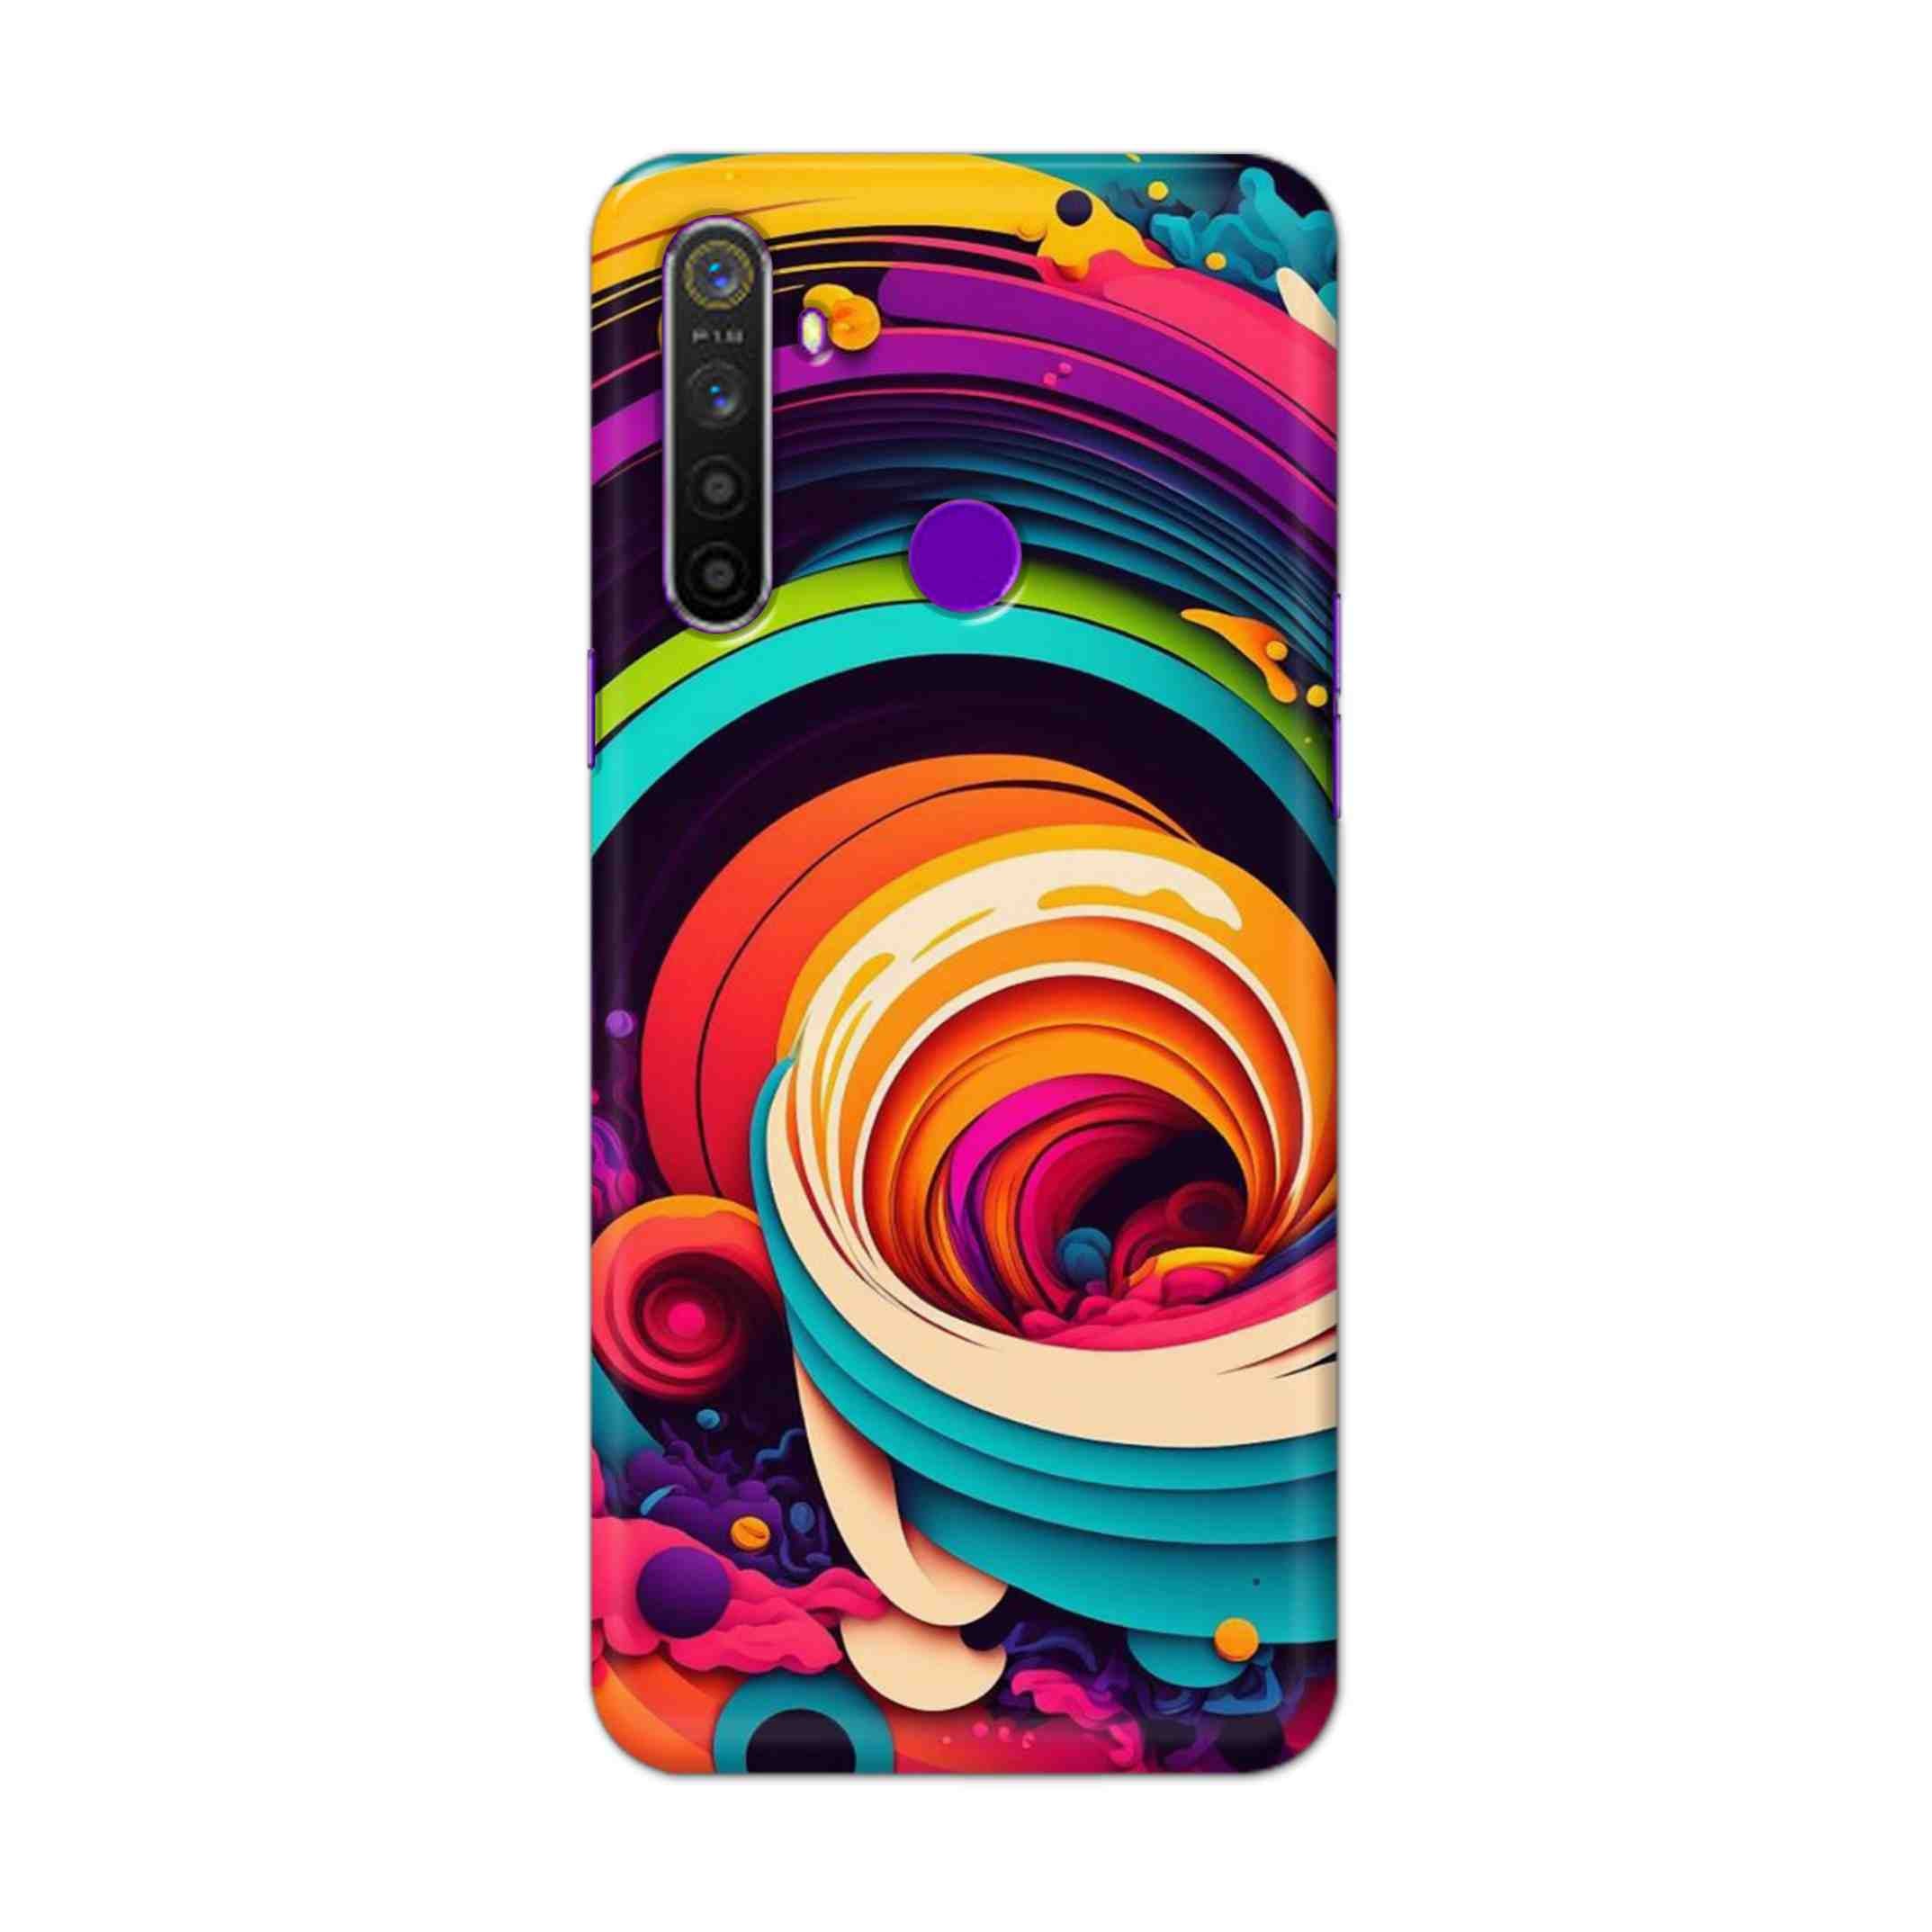 Buy Colour Circle Hard Back Mobile Phone Case Cover For Realme 5 Pro Online